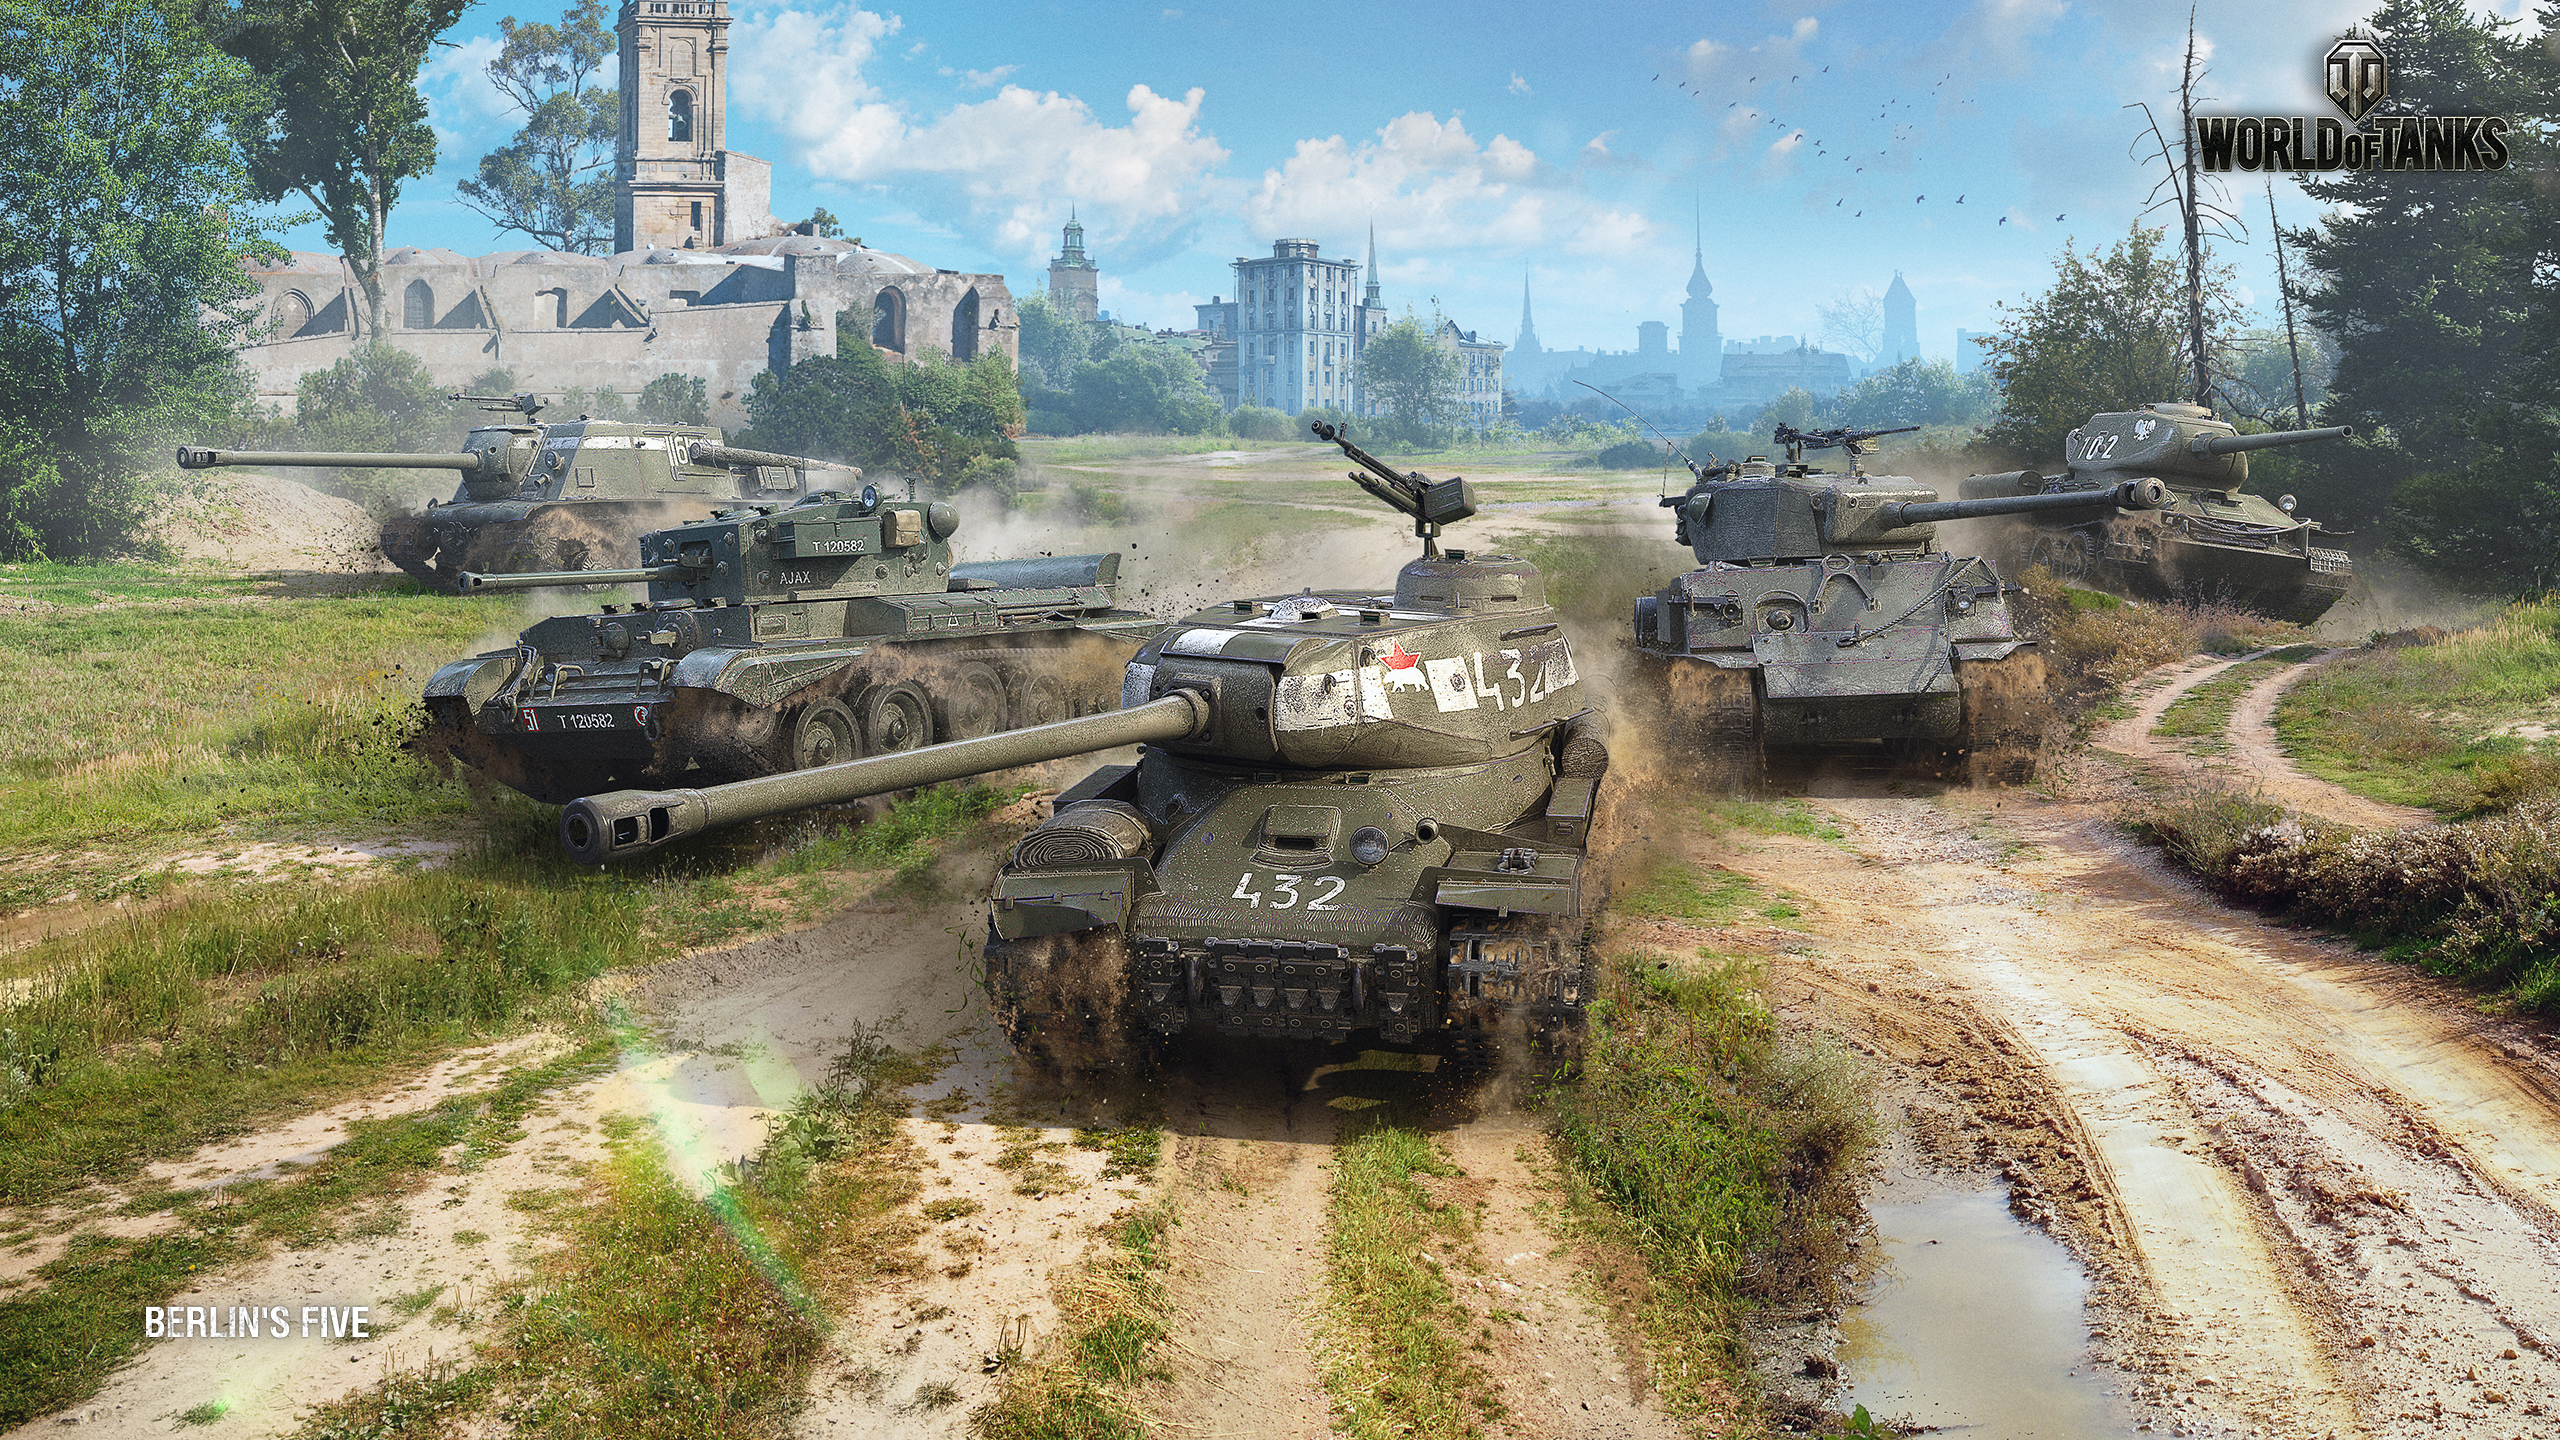 world of tanks wallpaper,combat vehicle,tank,strategy video game,pc game,military vehicle